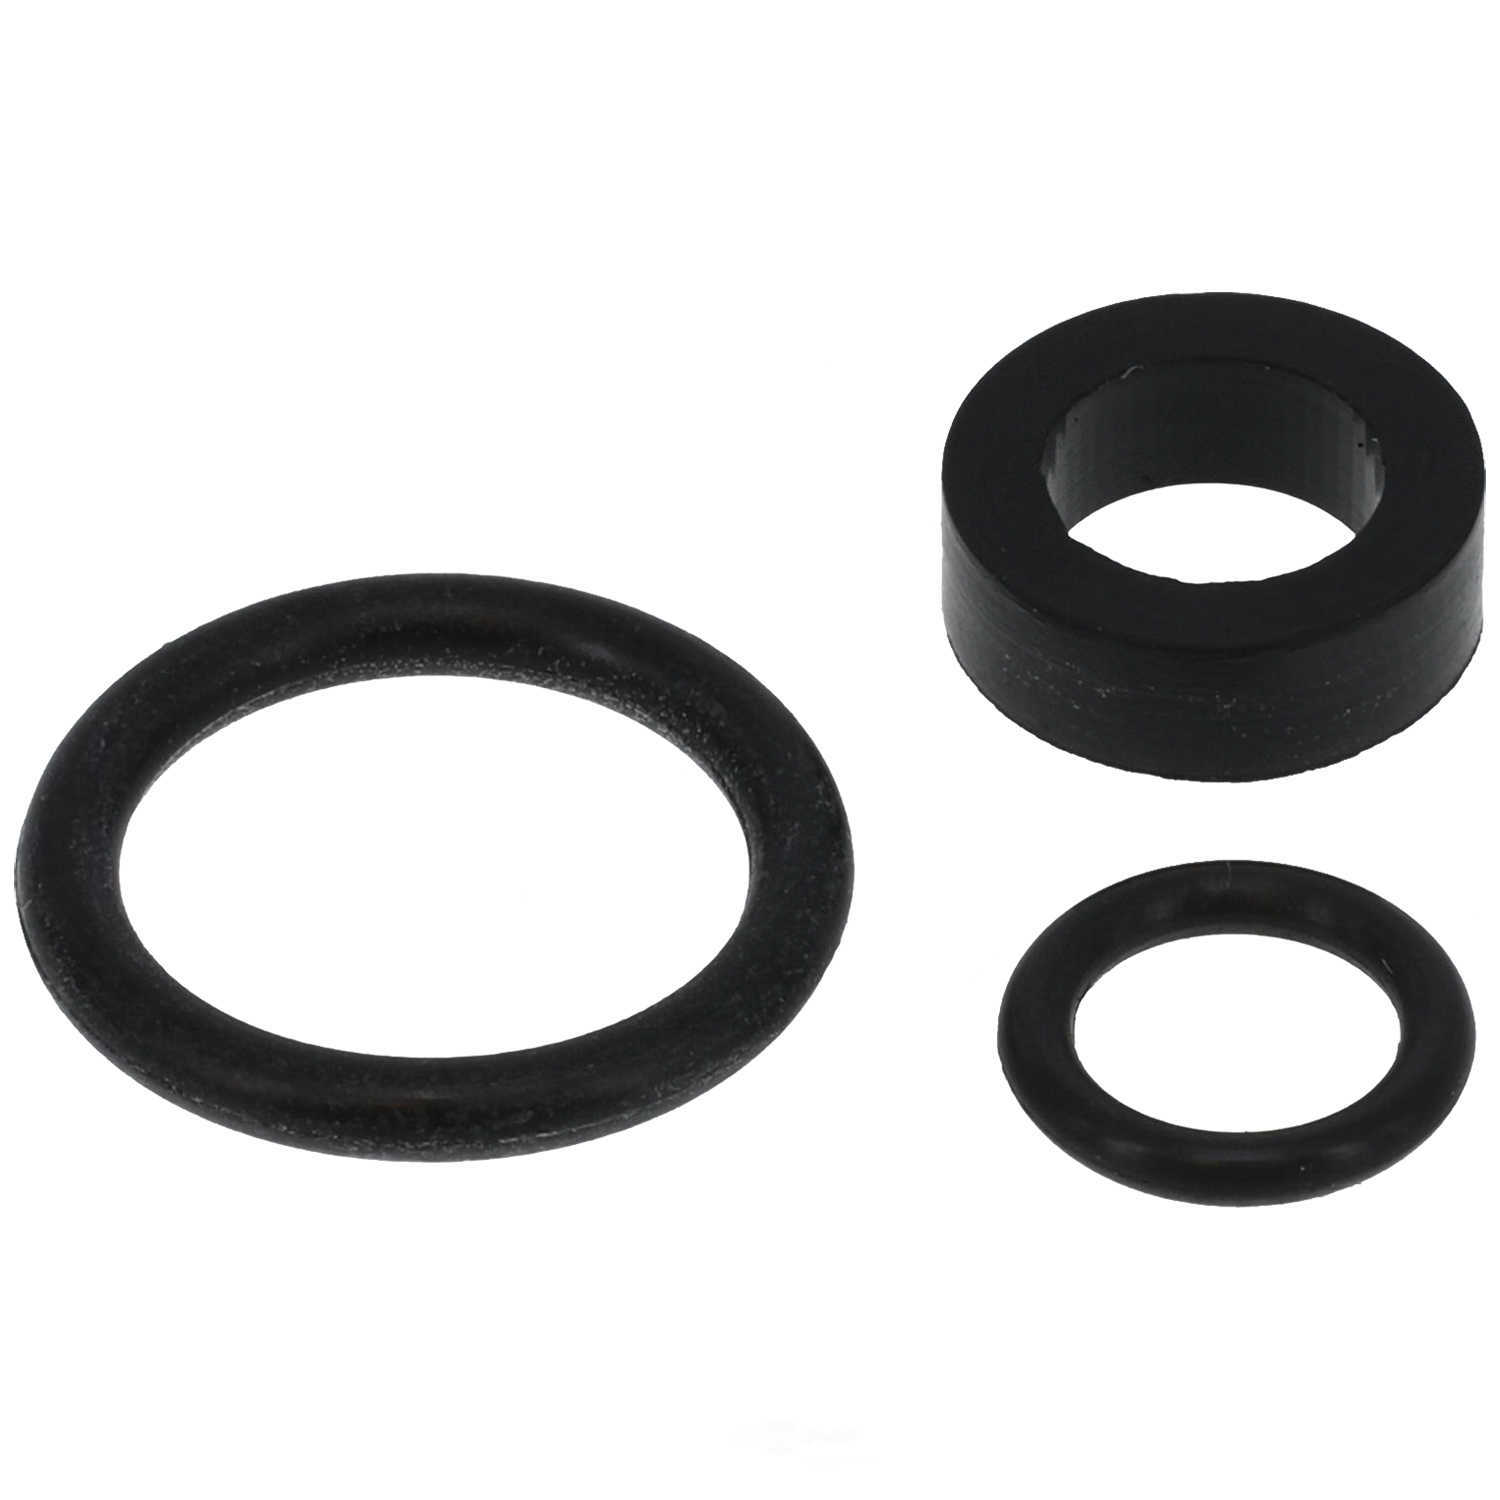 GB REMANUFACTURING INC. - Fuel Injector Seal Kit - GBR 8-004